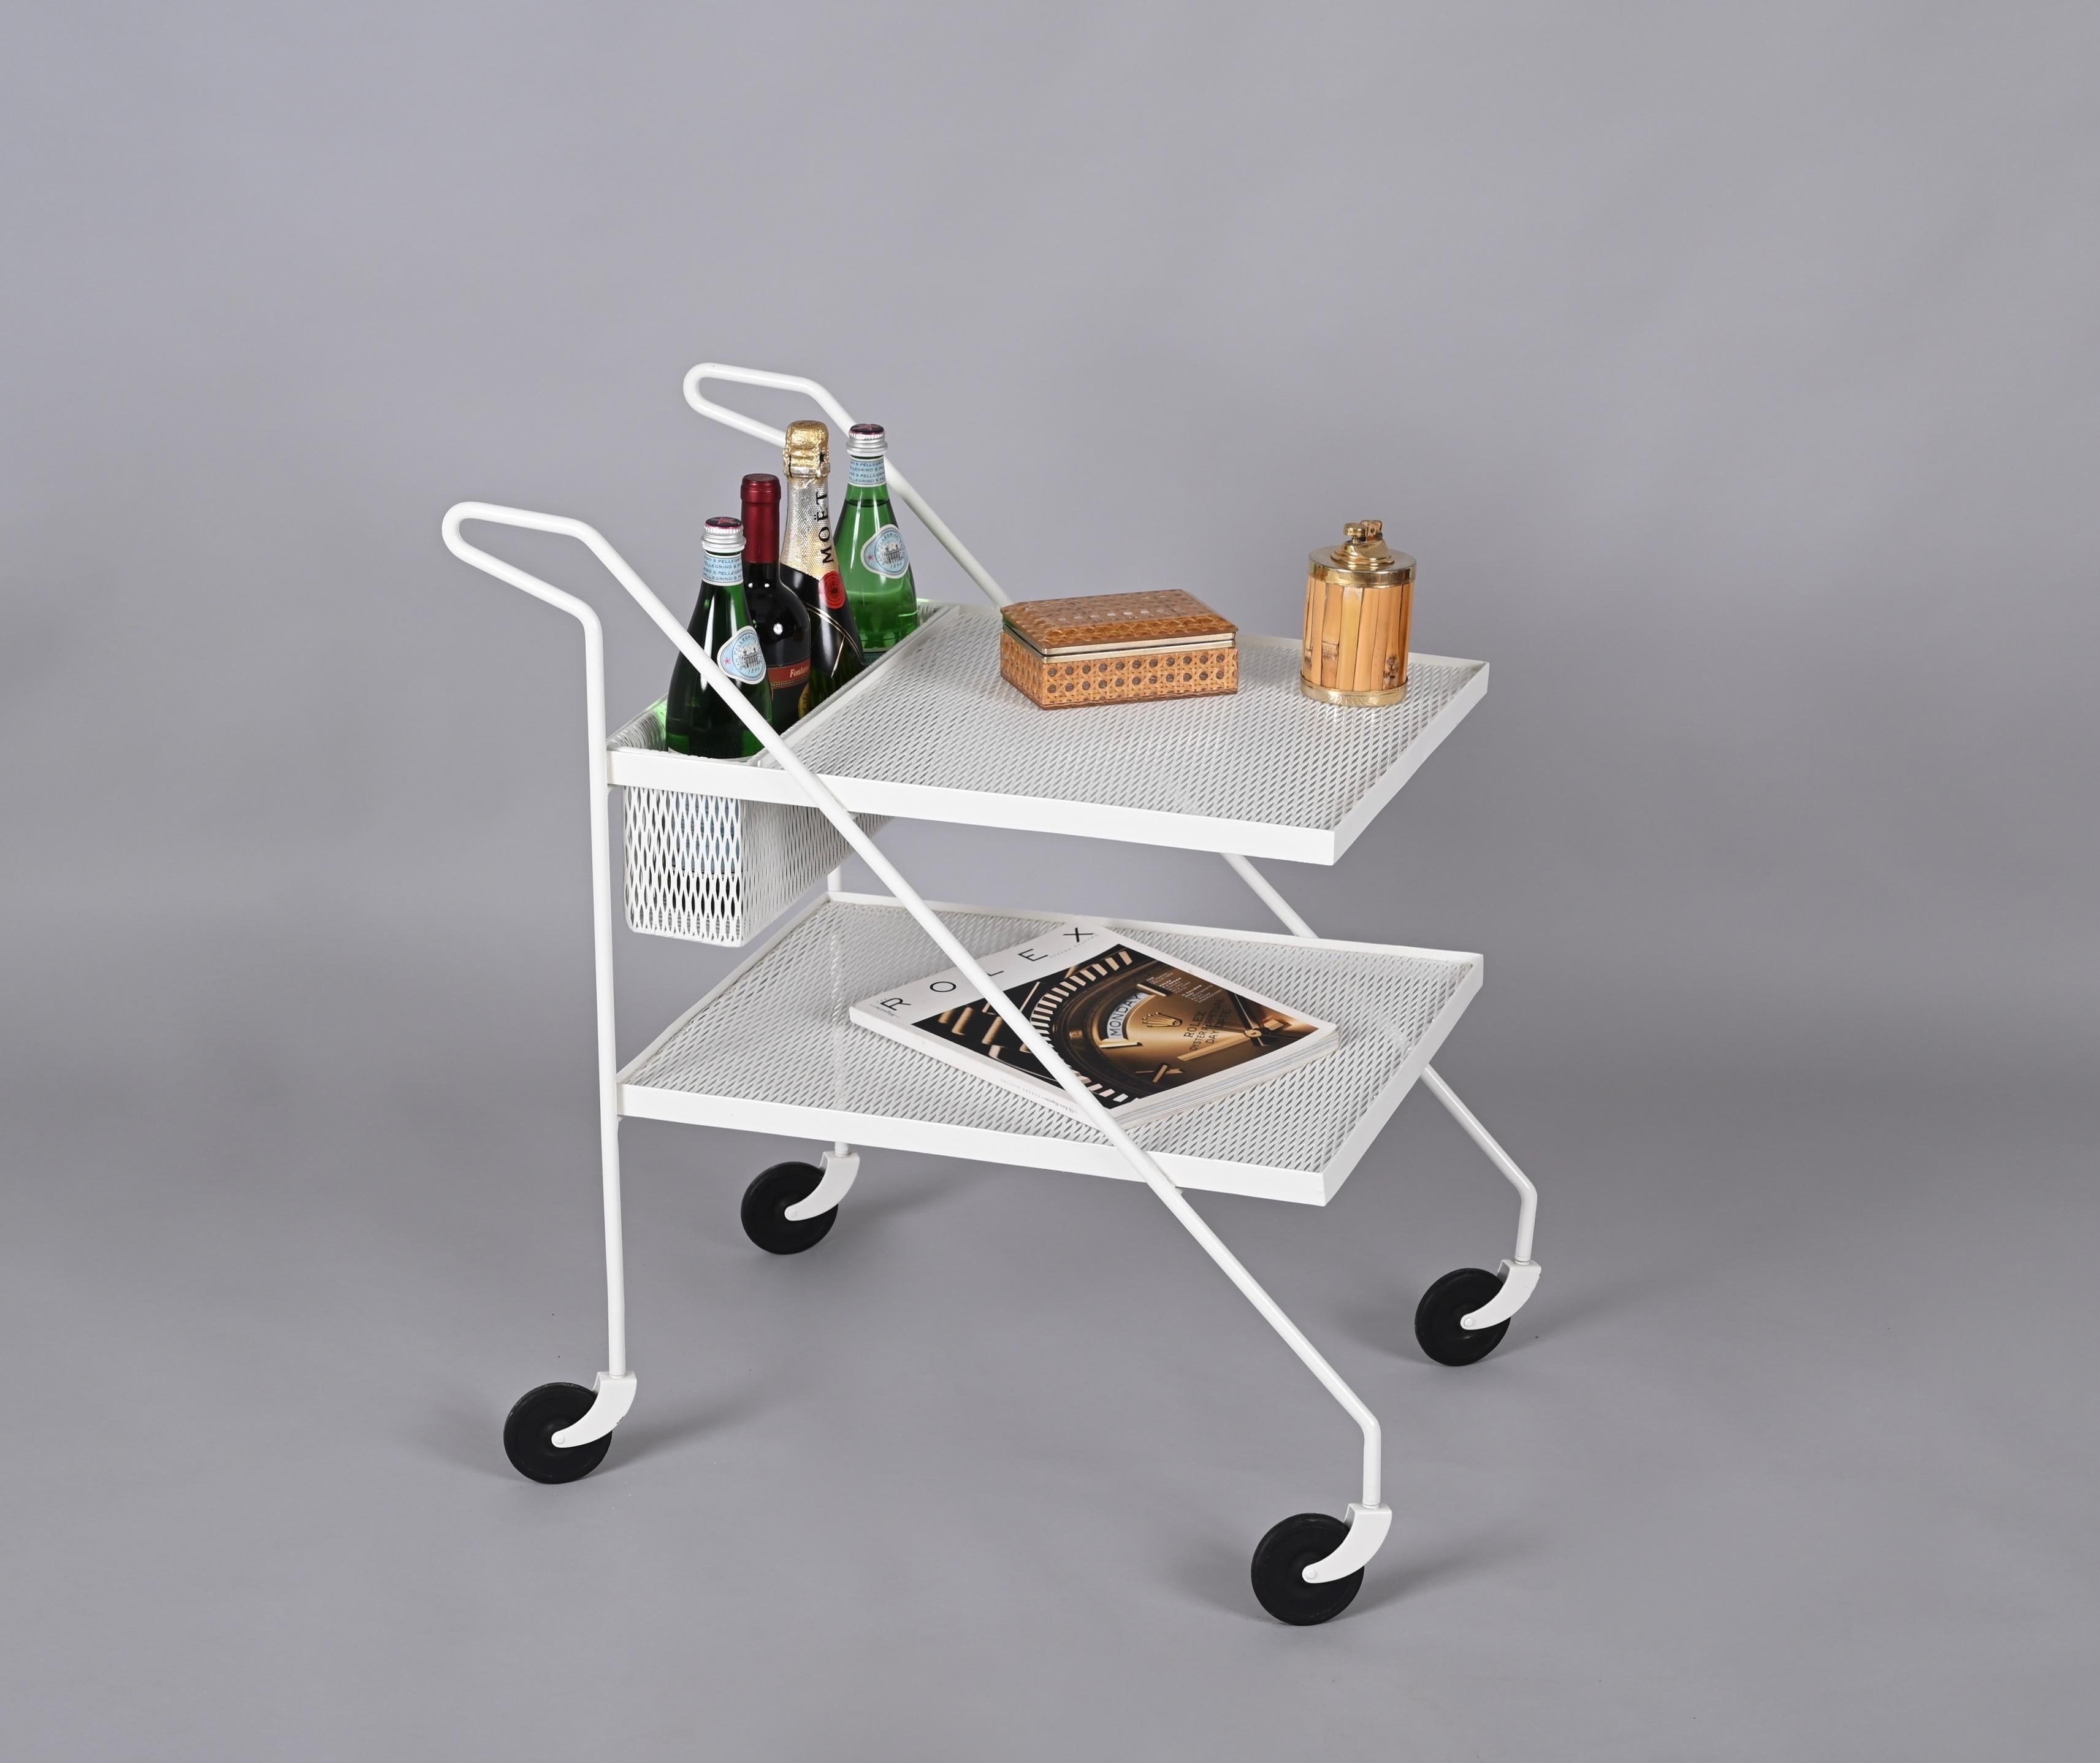 Lovely serving bar cart in perforated enameled iron with a removable top bottle holder. This gorgeous piece was realized in France in the 1970s, clearly in the style of Mathieu Matégot.

The curved handles together with the perforated iron trays and